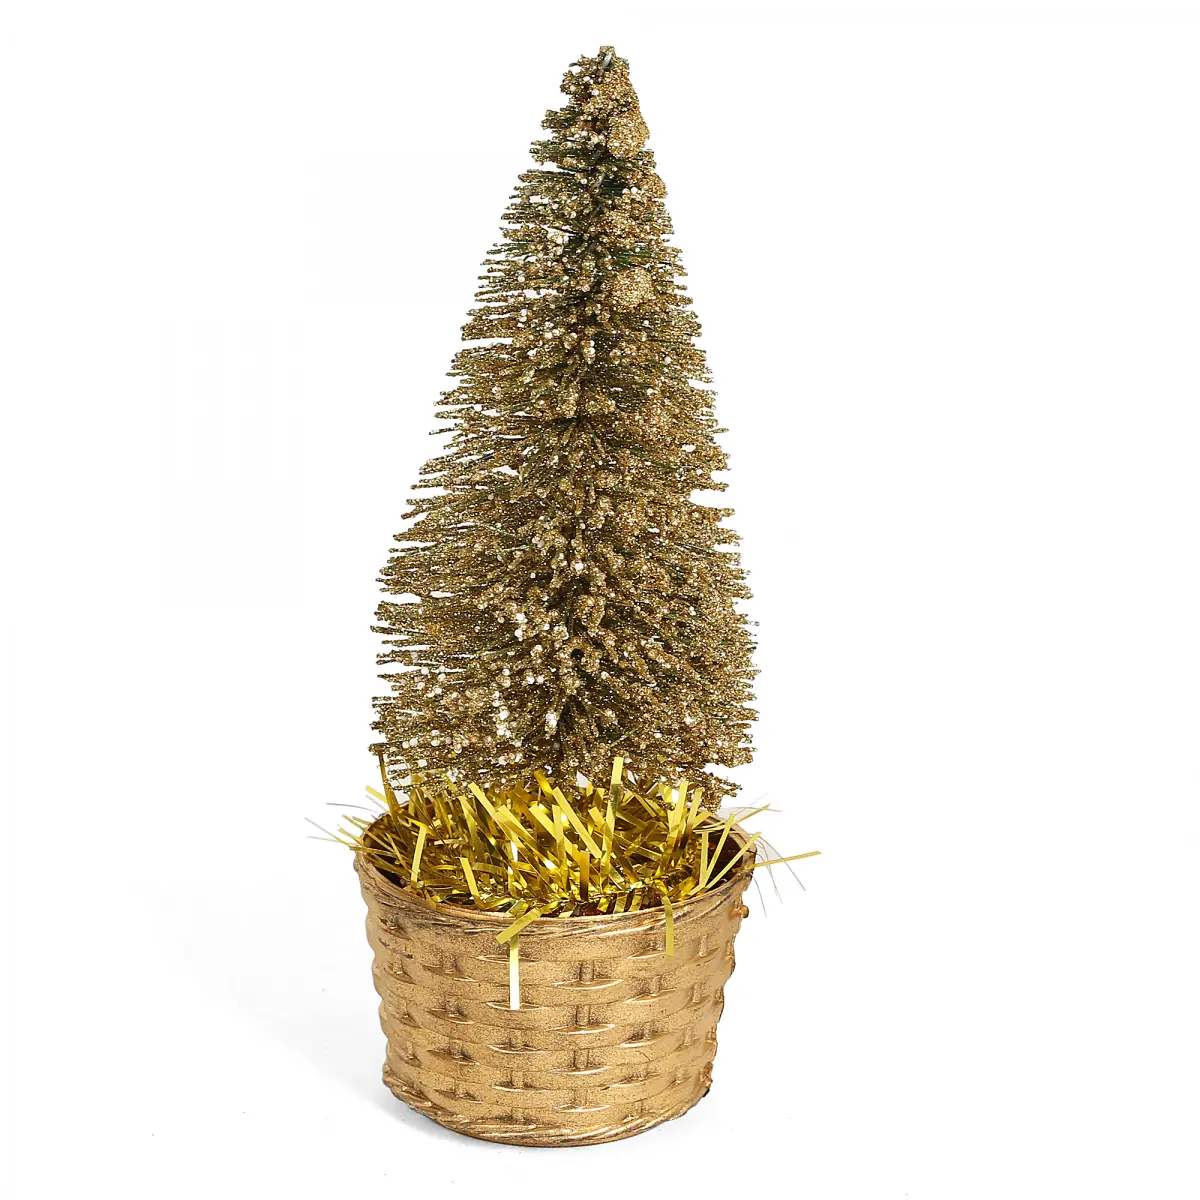 Boing Christmas Tree Decorations, 18cm, Gold